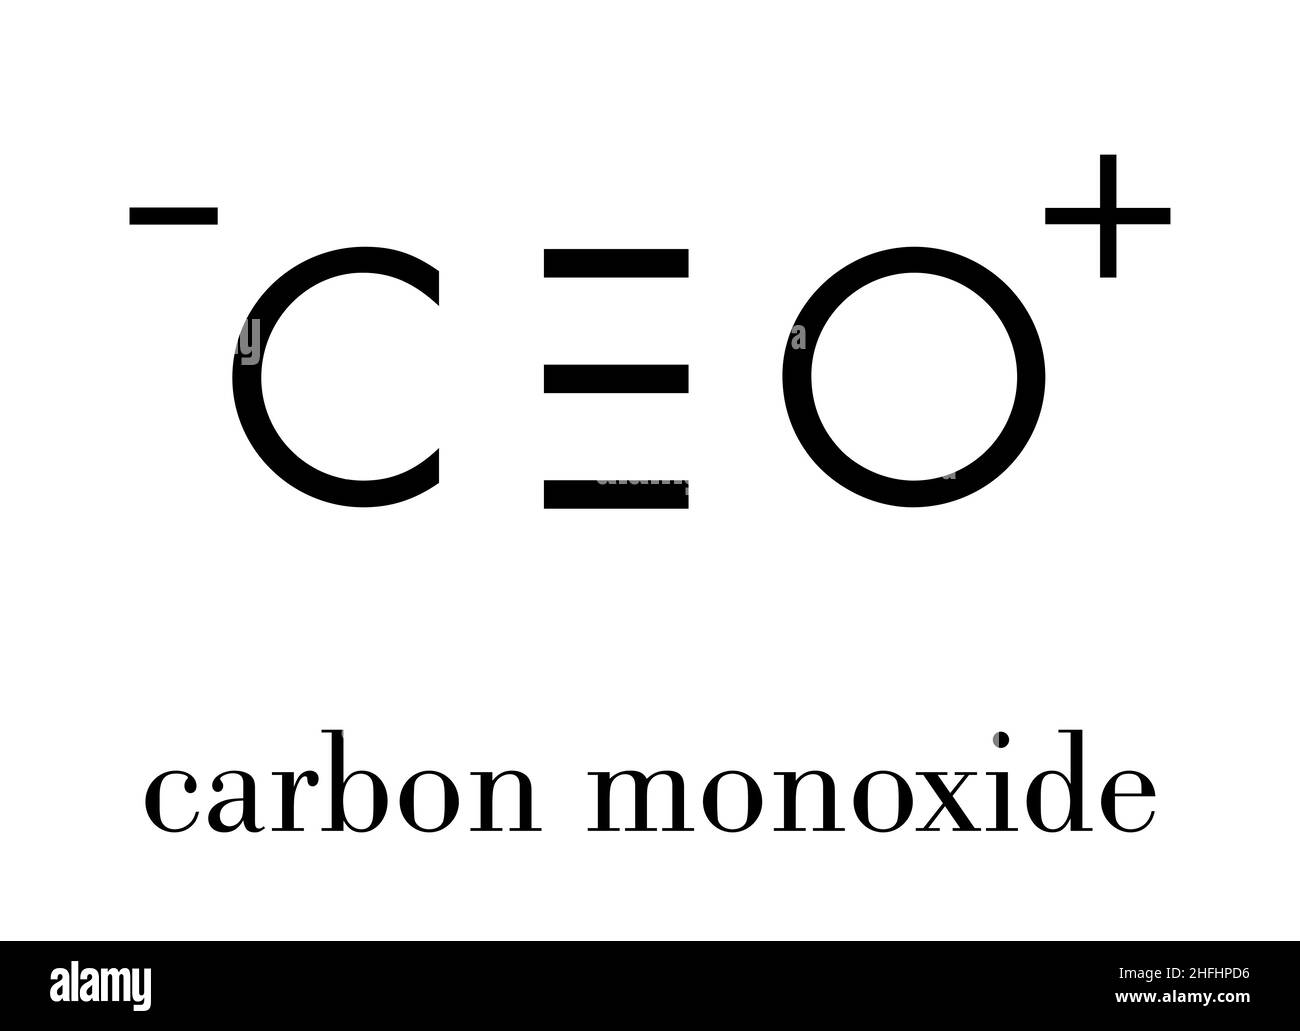 Carbon monoxide (CO) toxic gas molecule. Carbon monoxide poisoning frequently occurs due to malfunctioning fuel-burning home appliances. Skeletal form Stock Vector